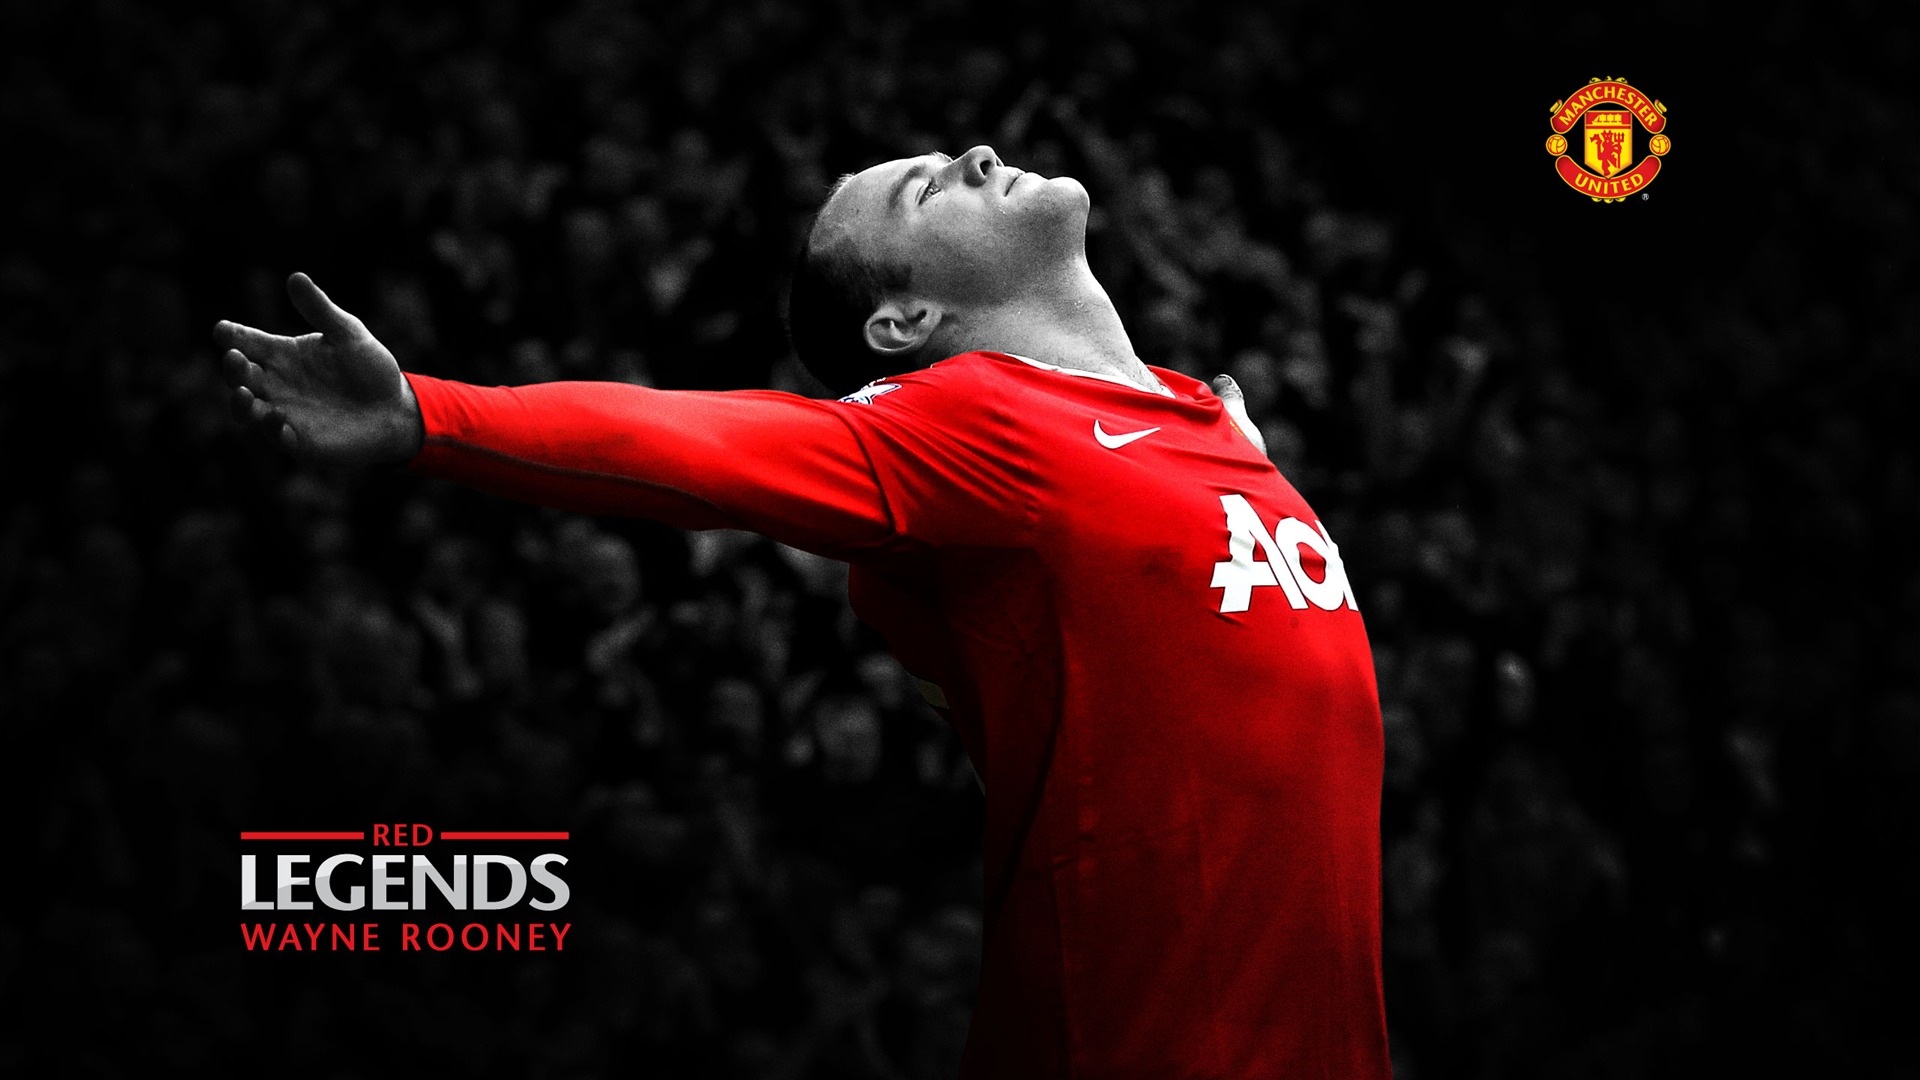 Manchester United High Definition Wallpaper 1080p